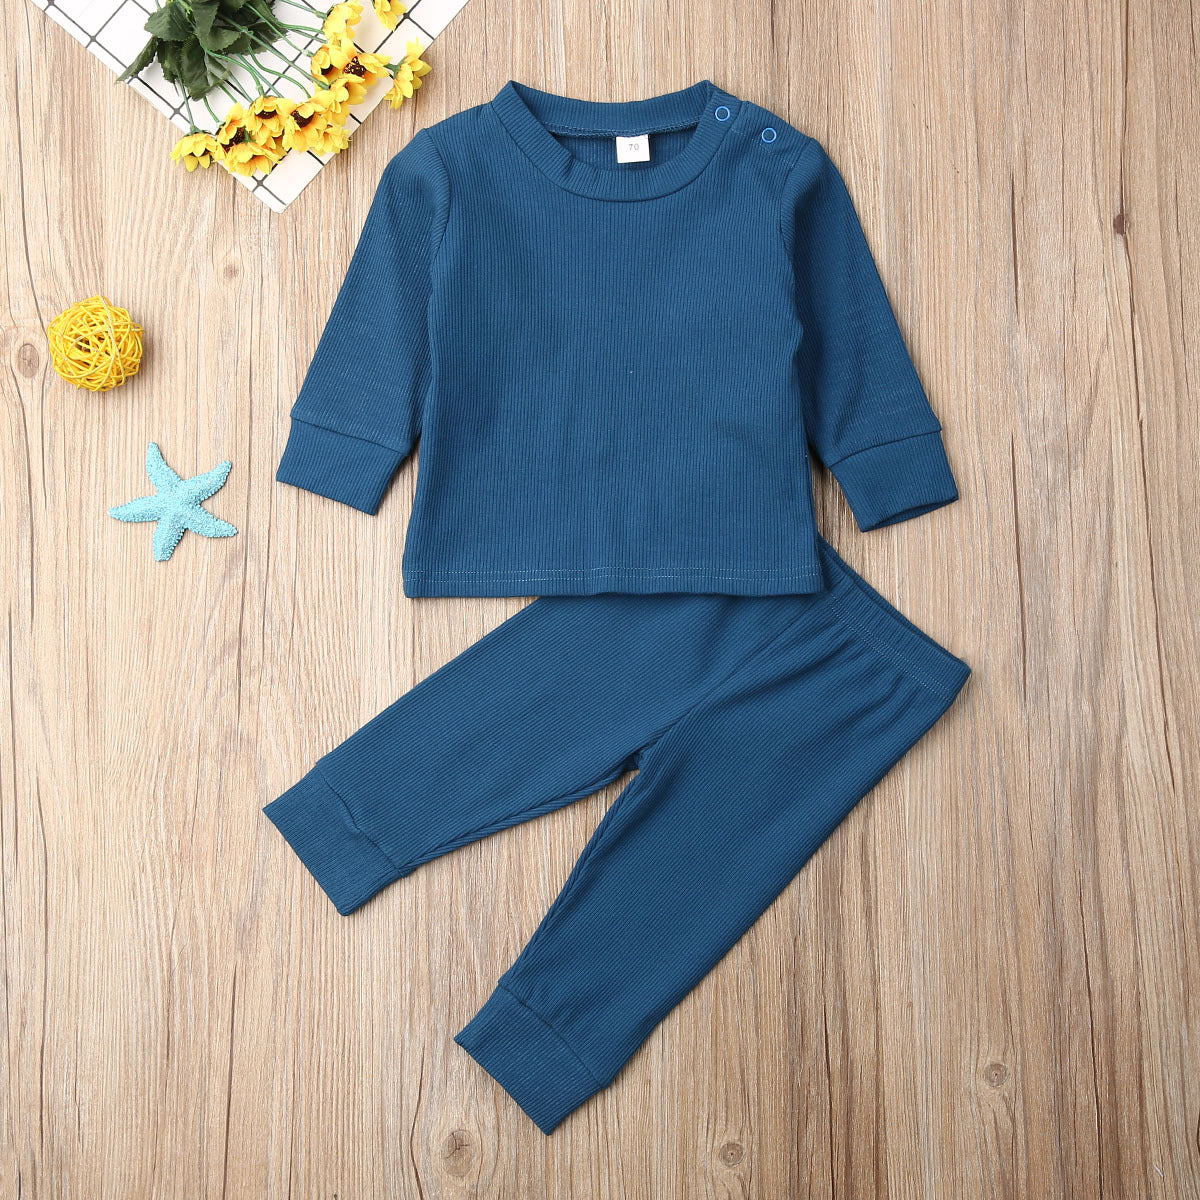 Blue Long Sleeve Lounge Outfit - 2pc set